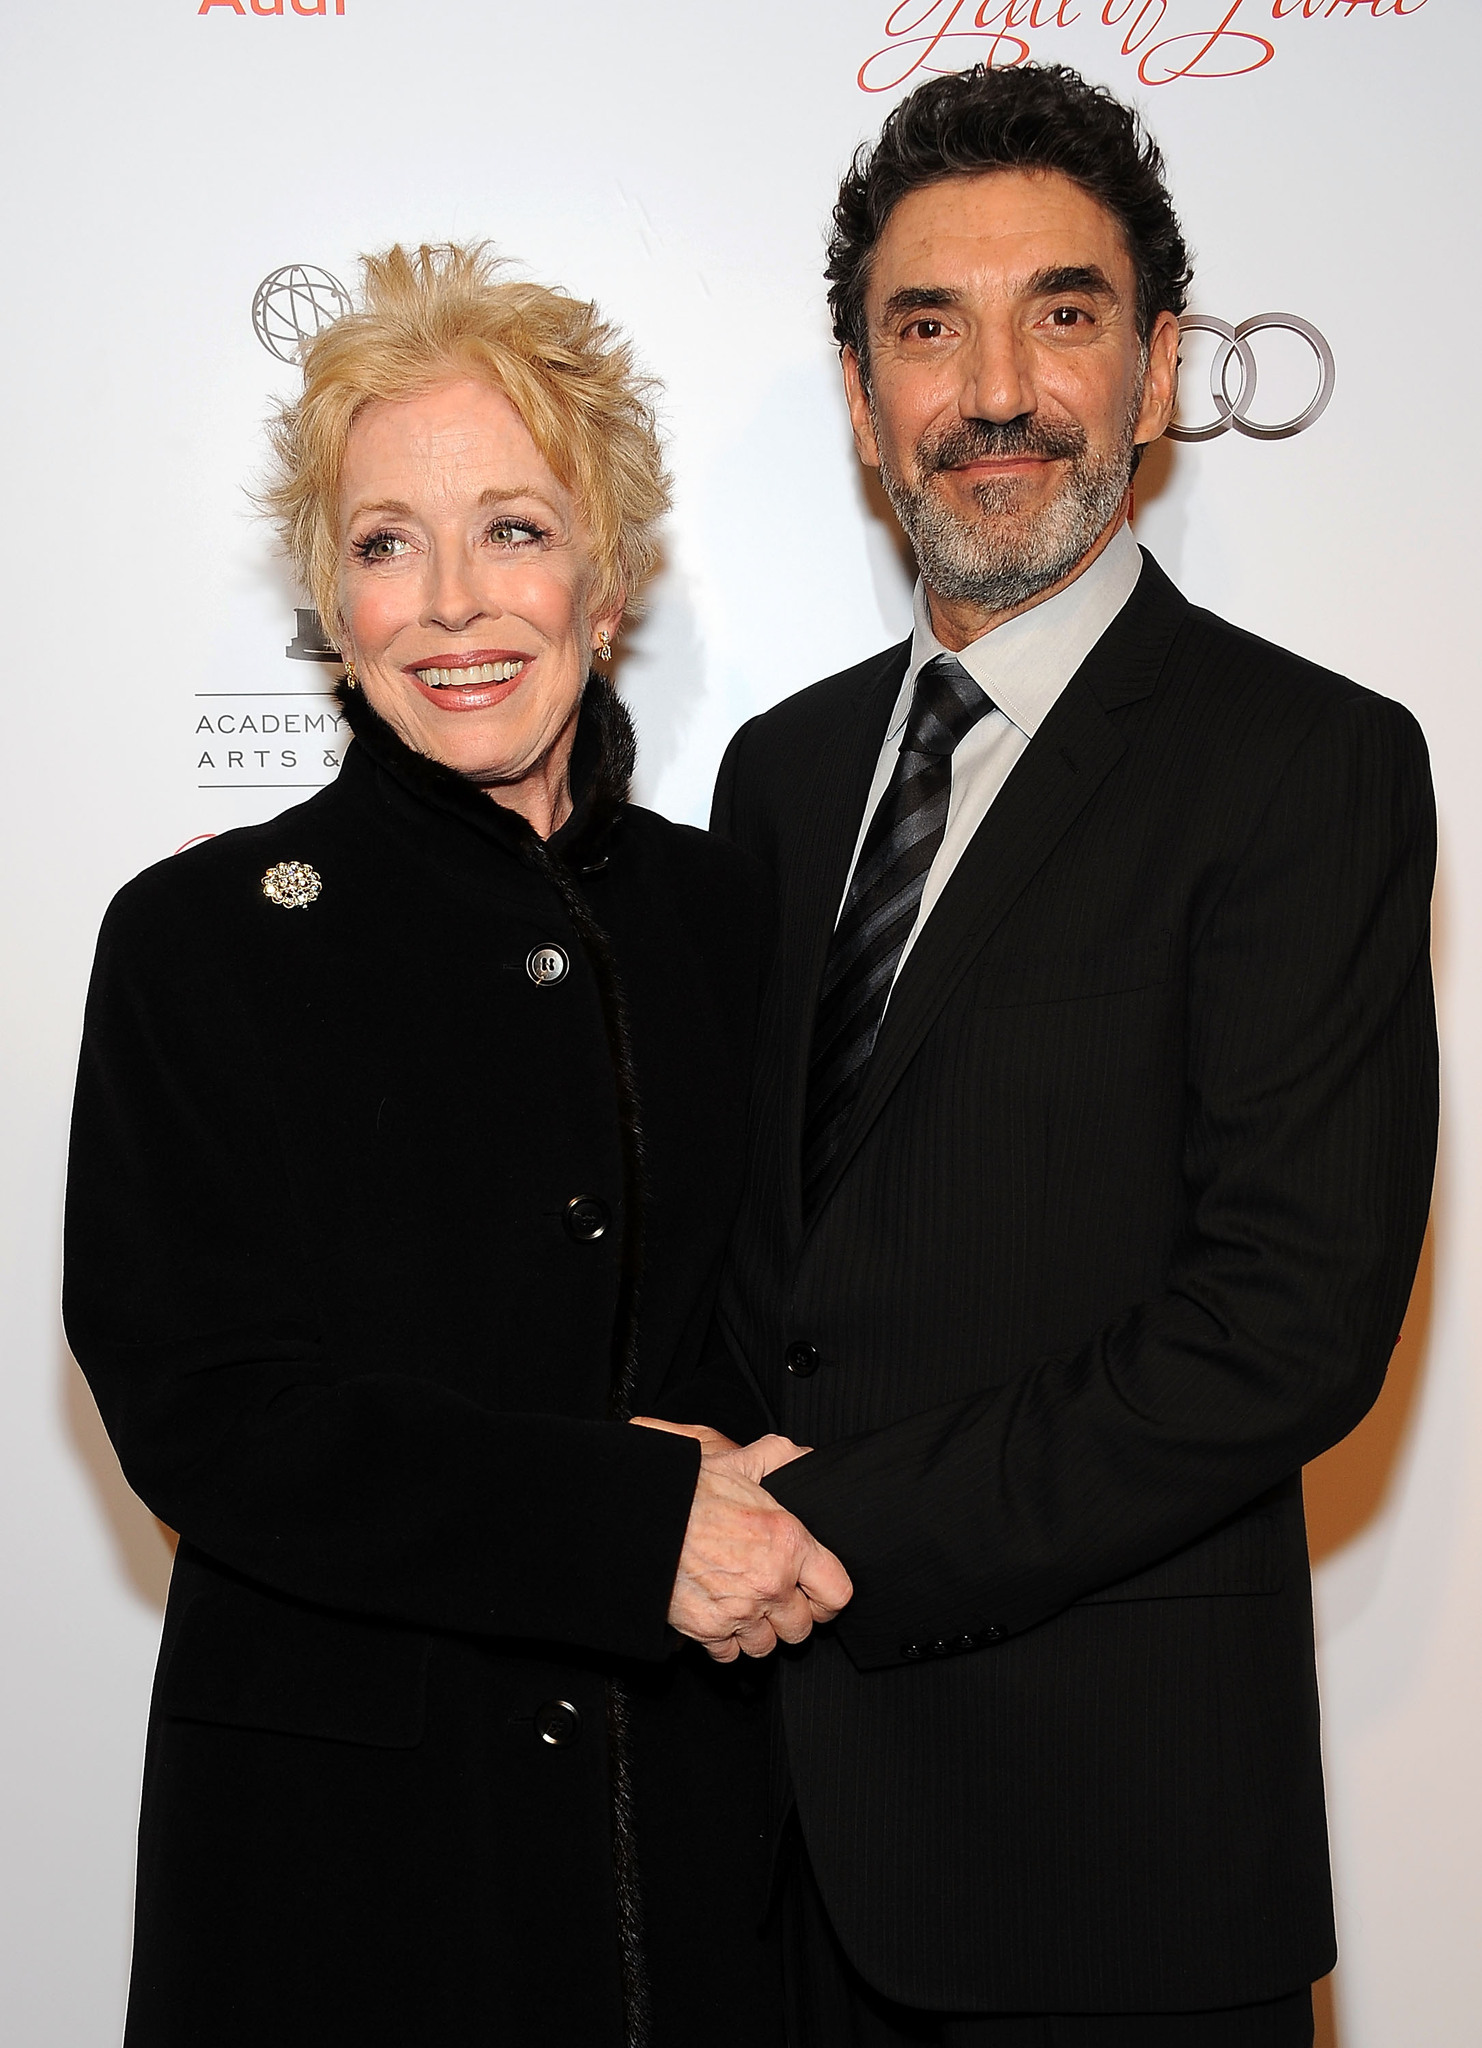 Chuck Lorre and Holland Taylor